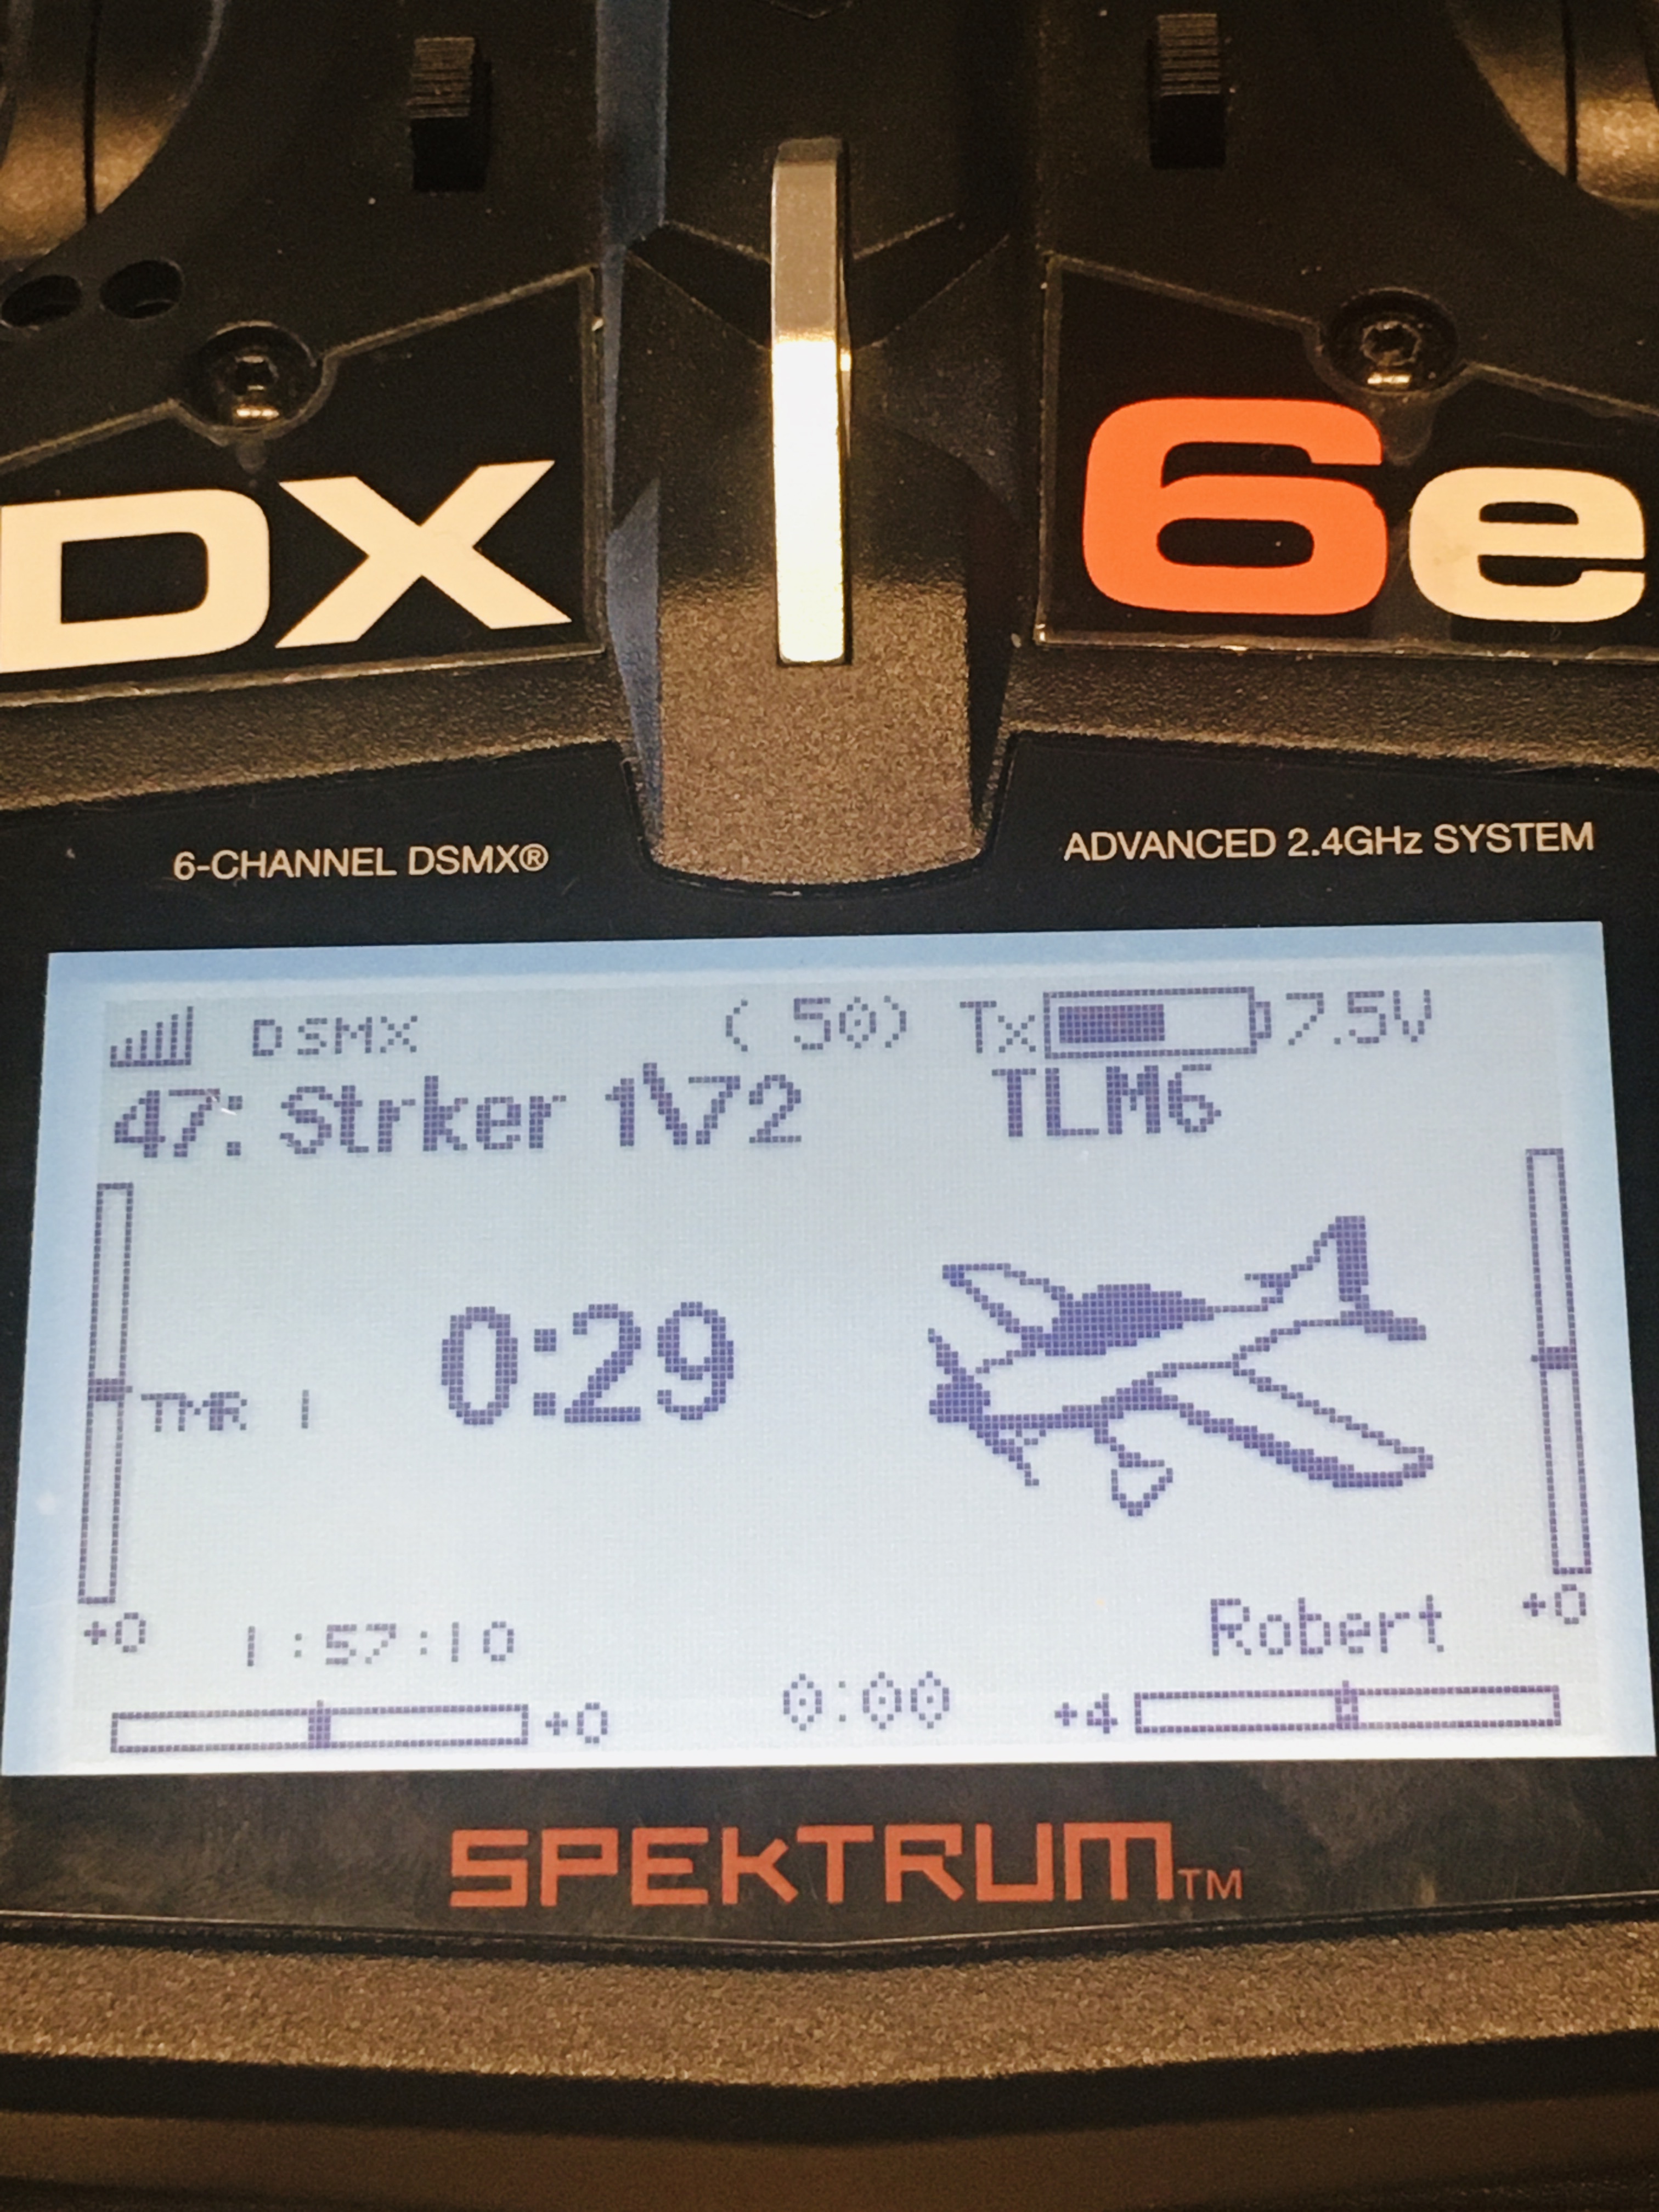 DSMX with Telemetry. Signal strength at the receiver upper left. Throttle run time standard feature.